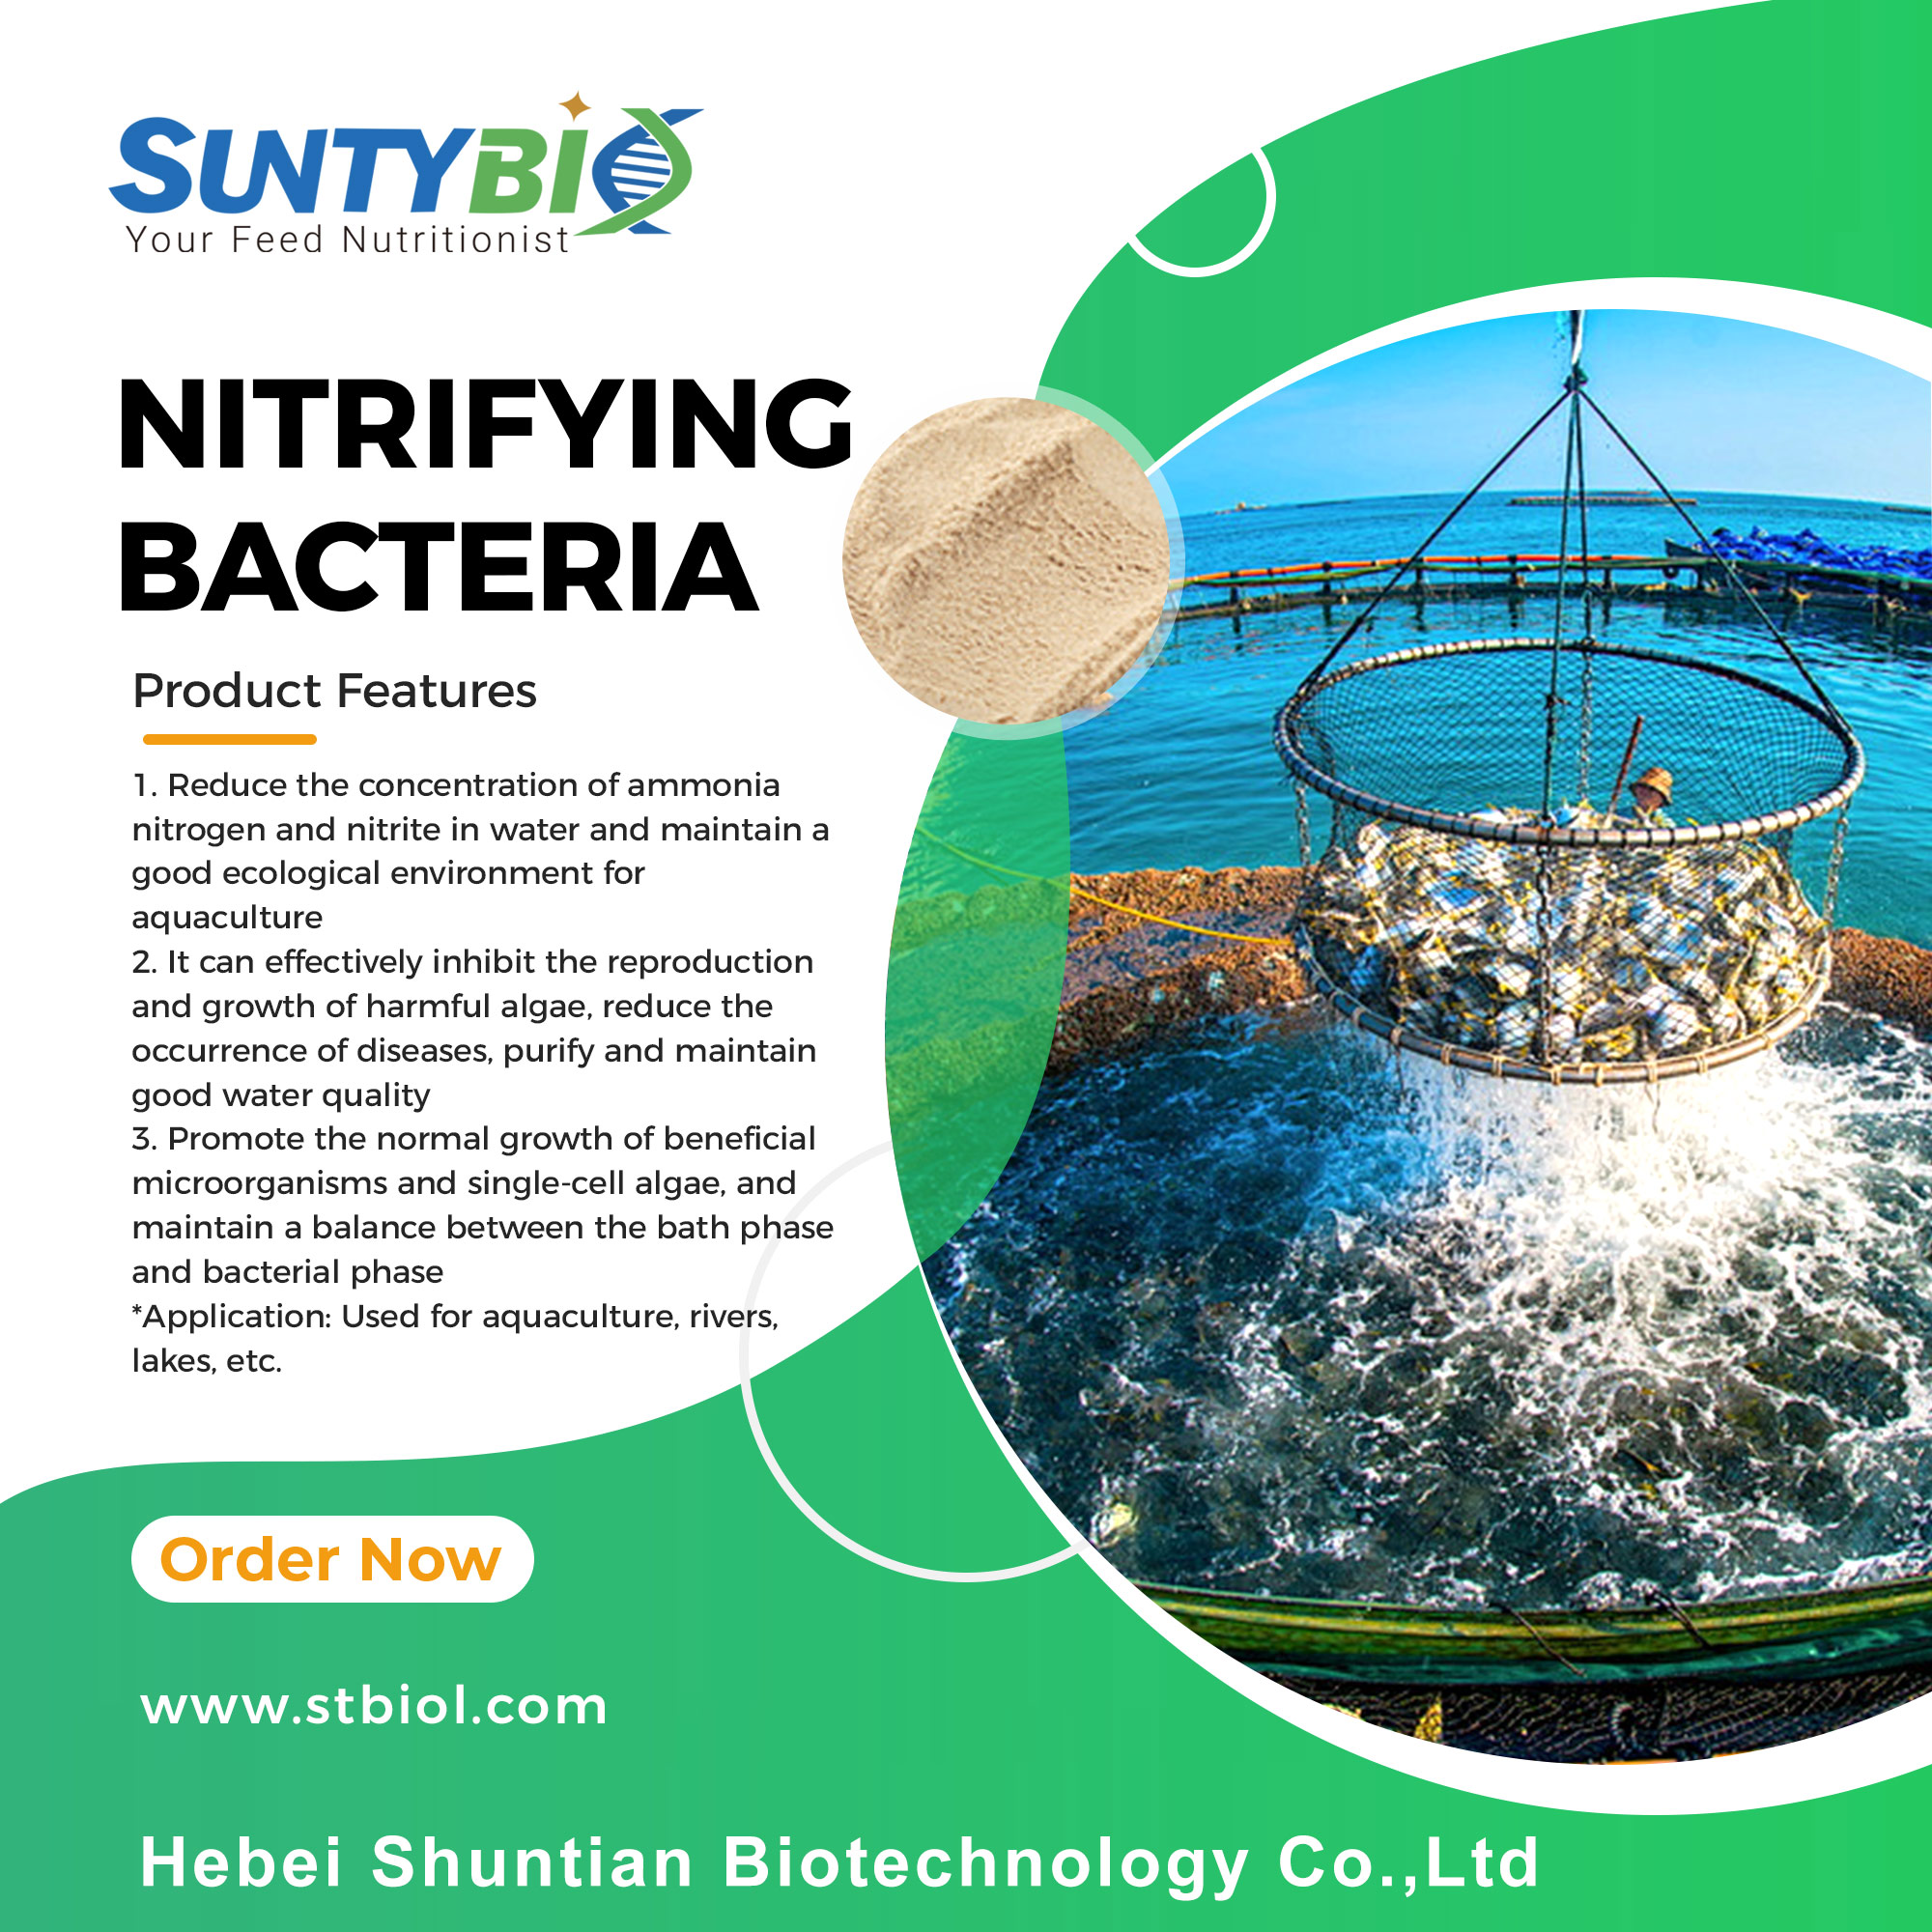 Do you know what nitrifying bacteria are?